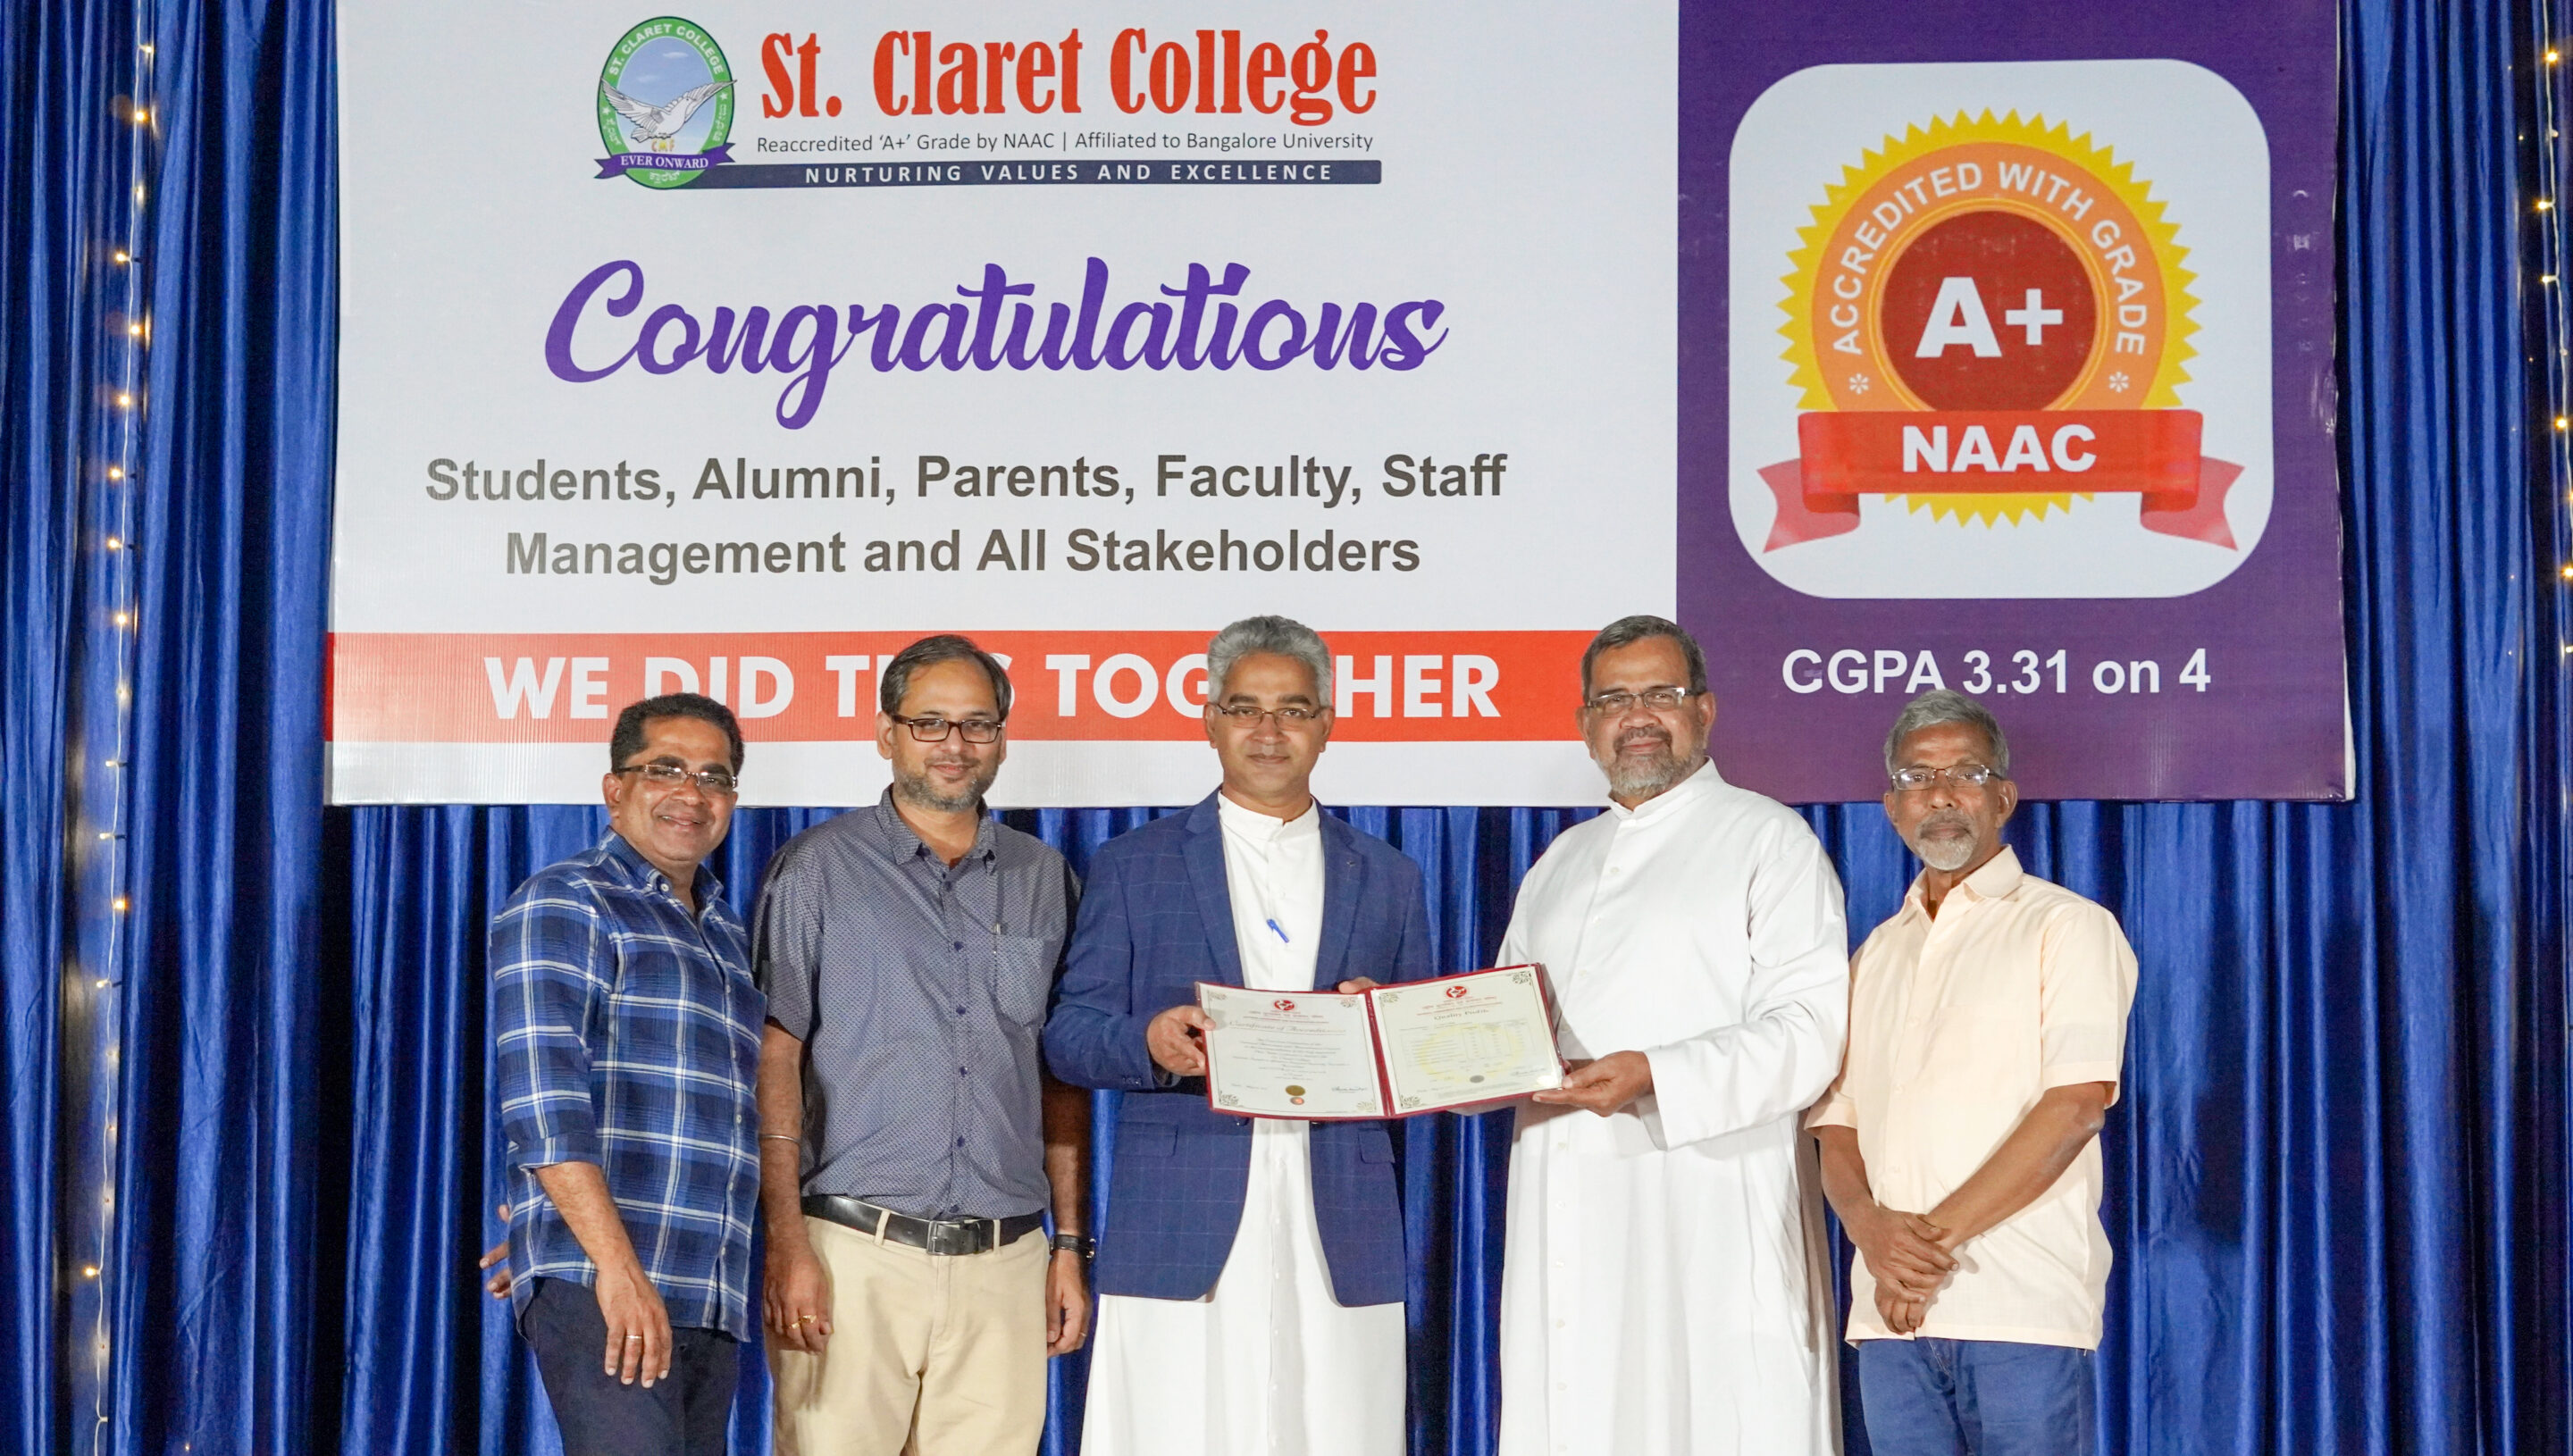 St. Claret College, Bangalore is Awarded A+ Grade by NAAC